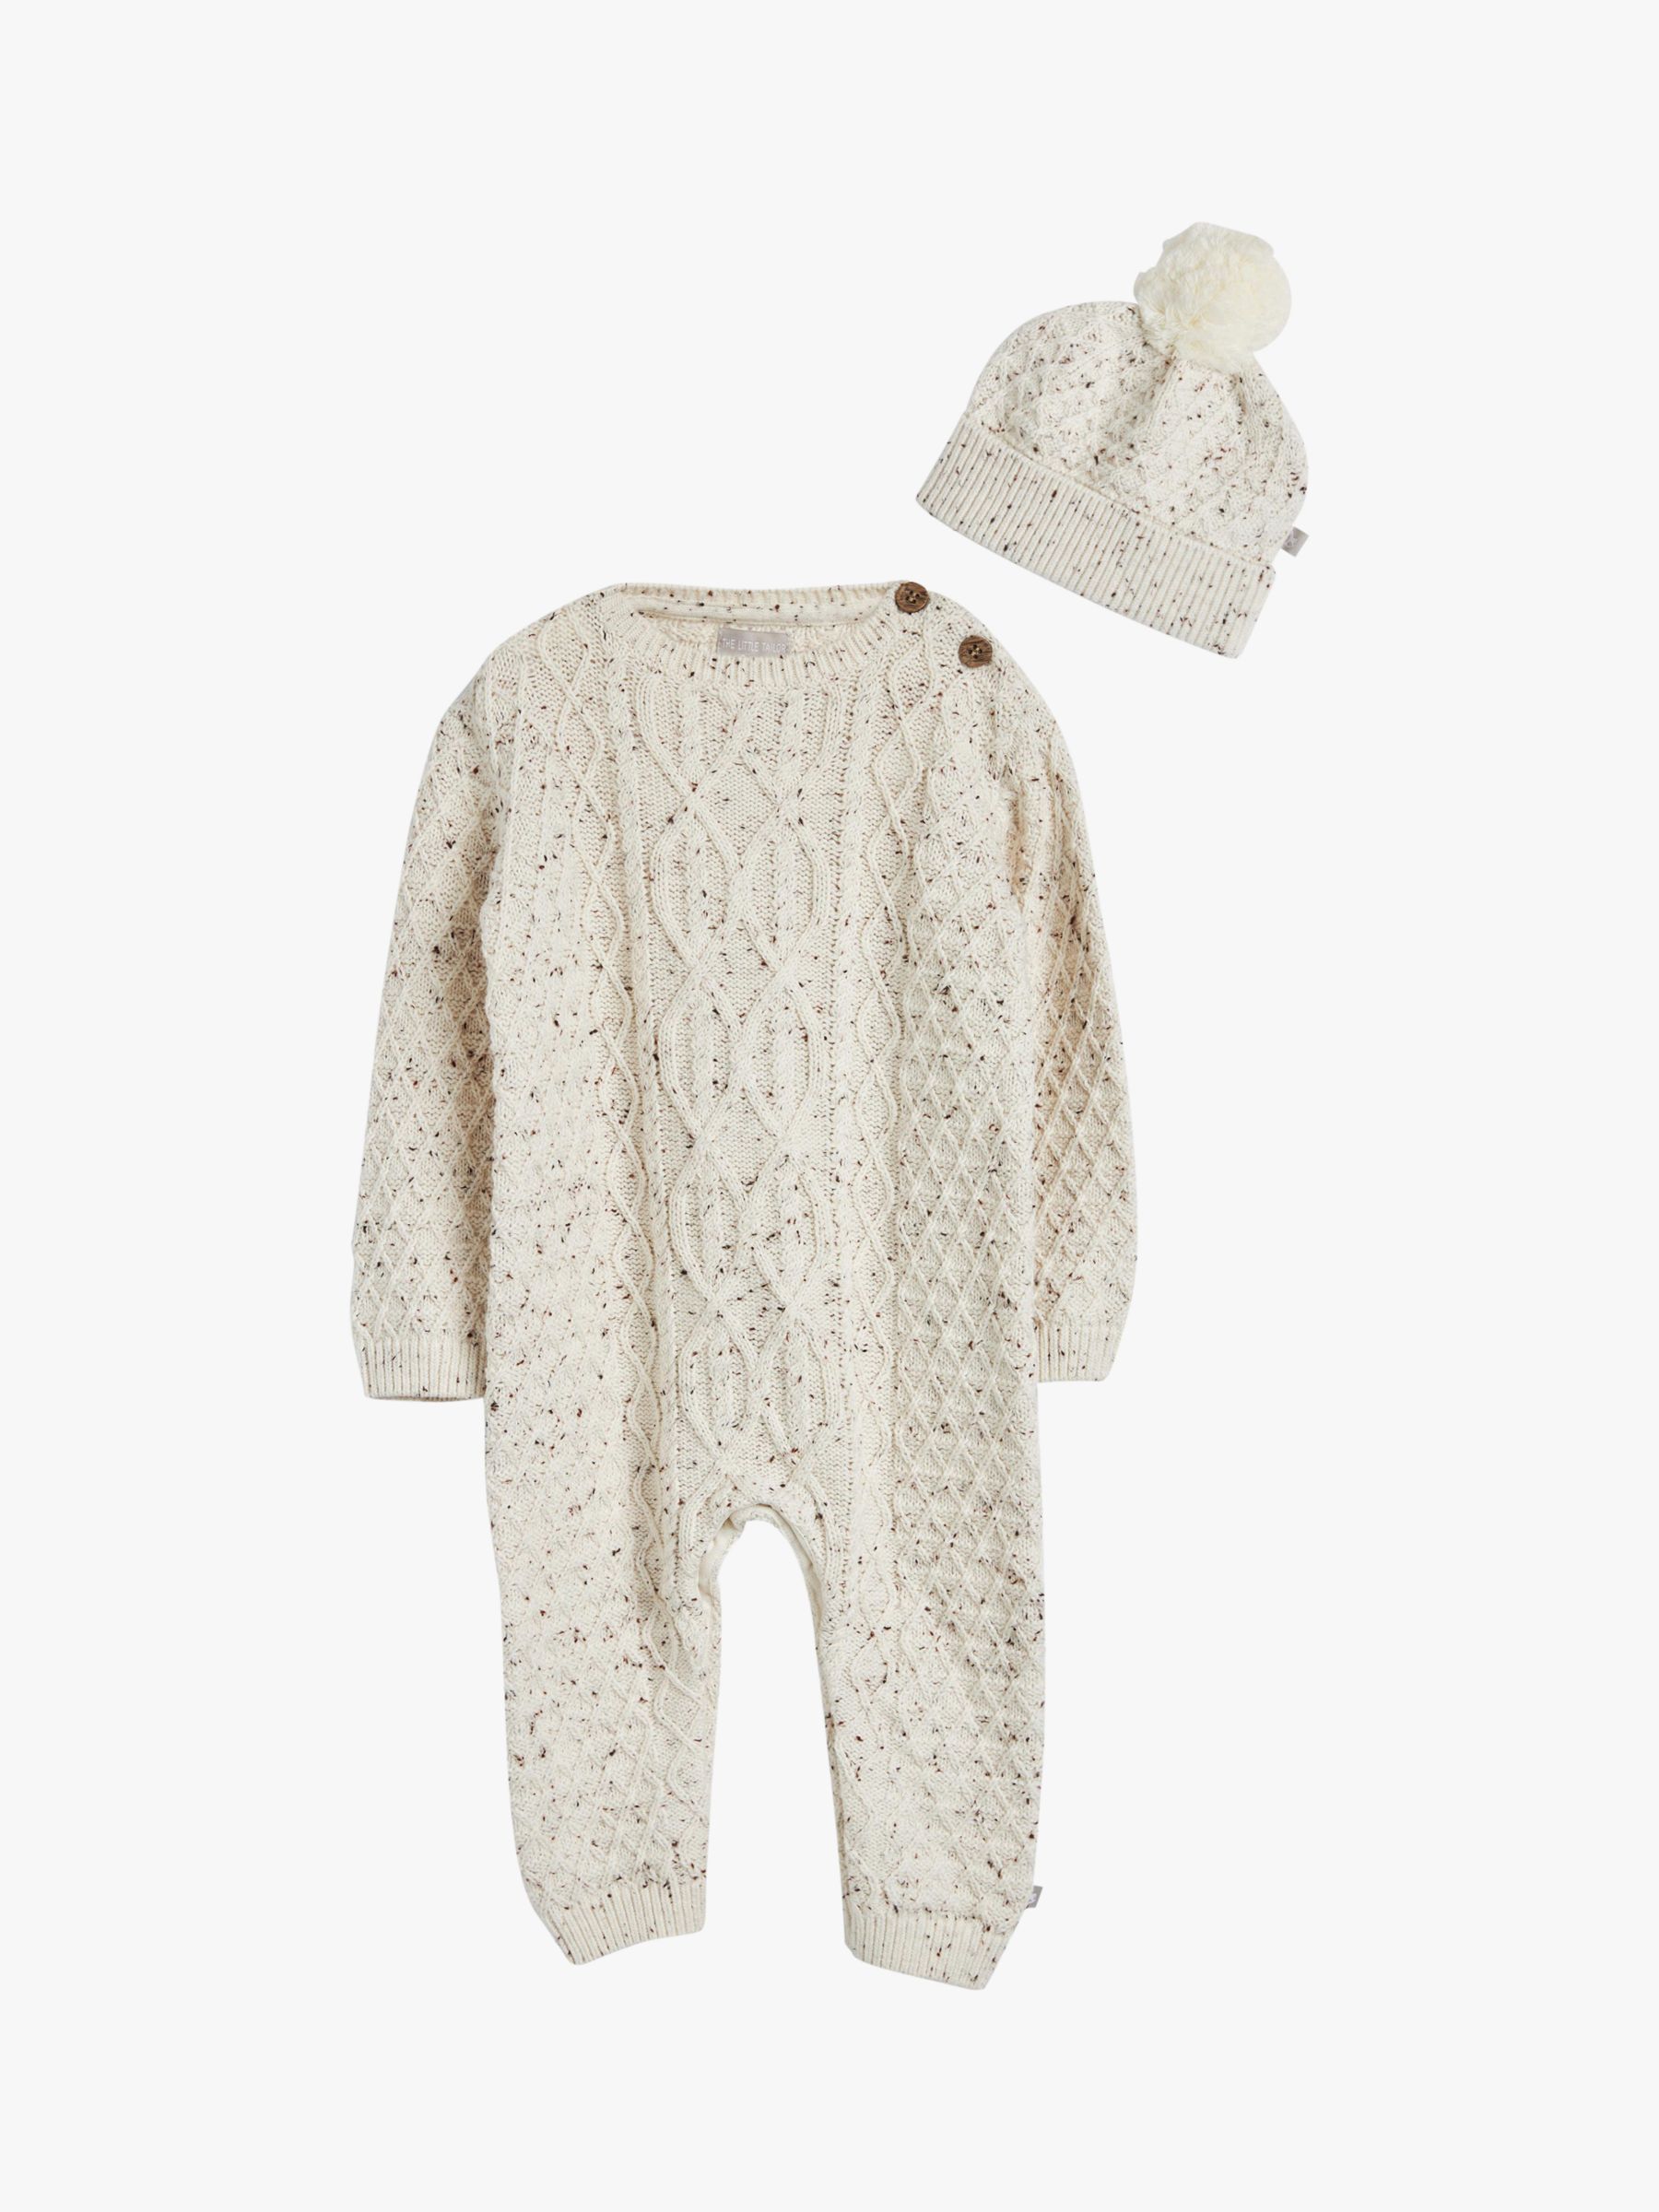 Buy The Little Tailor Baby Two Piece Romper & Hat Set Online at johnlewis.com